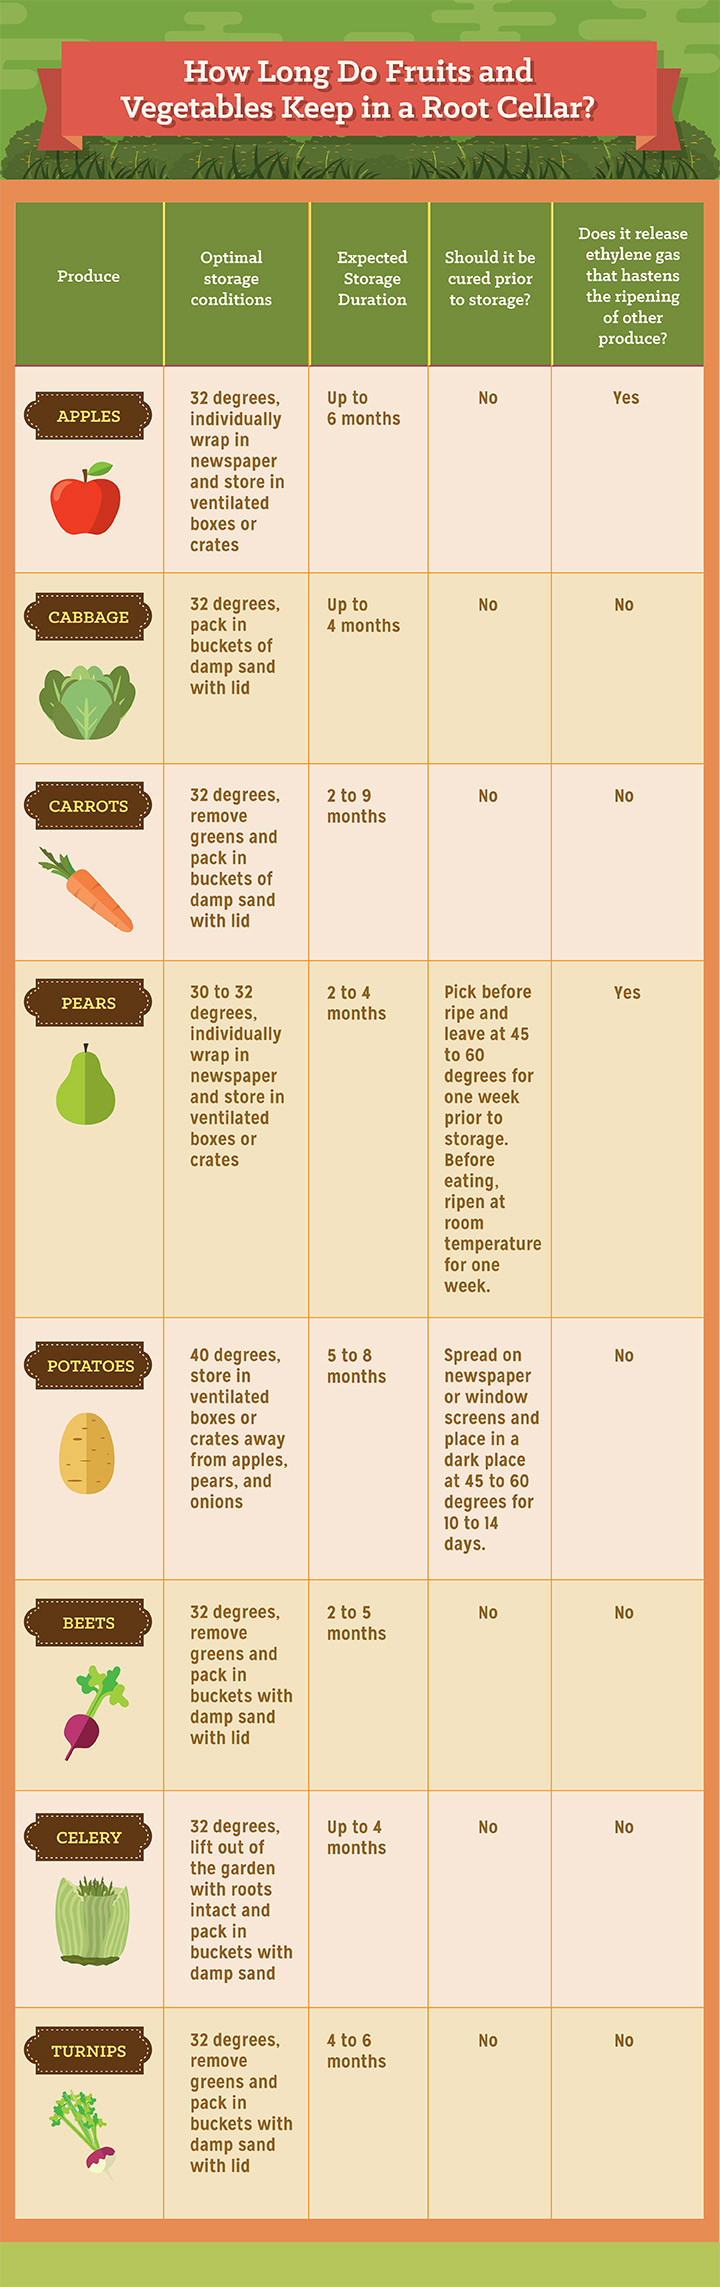 How Long Do Fruits and Vegetables Keep in a Root Cellar